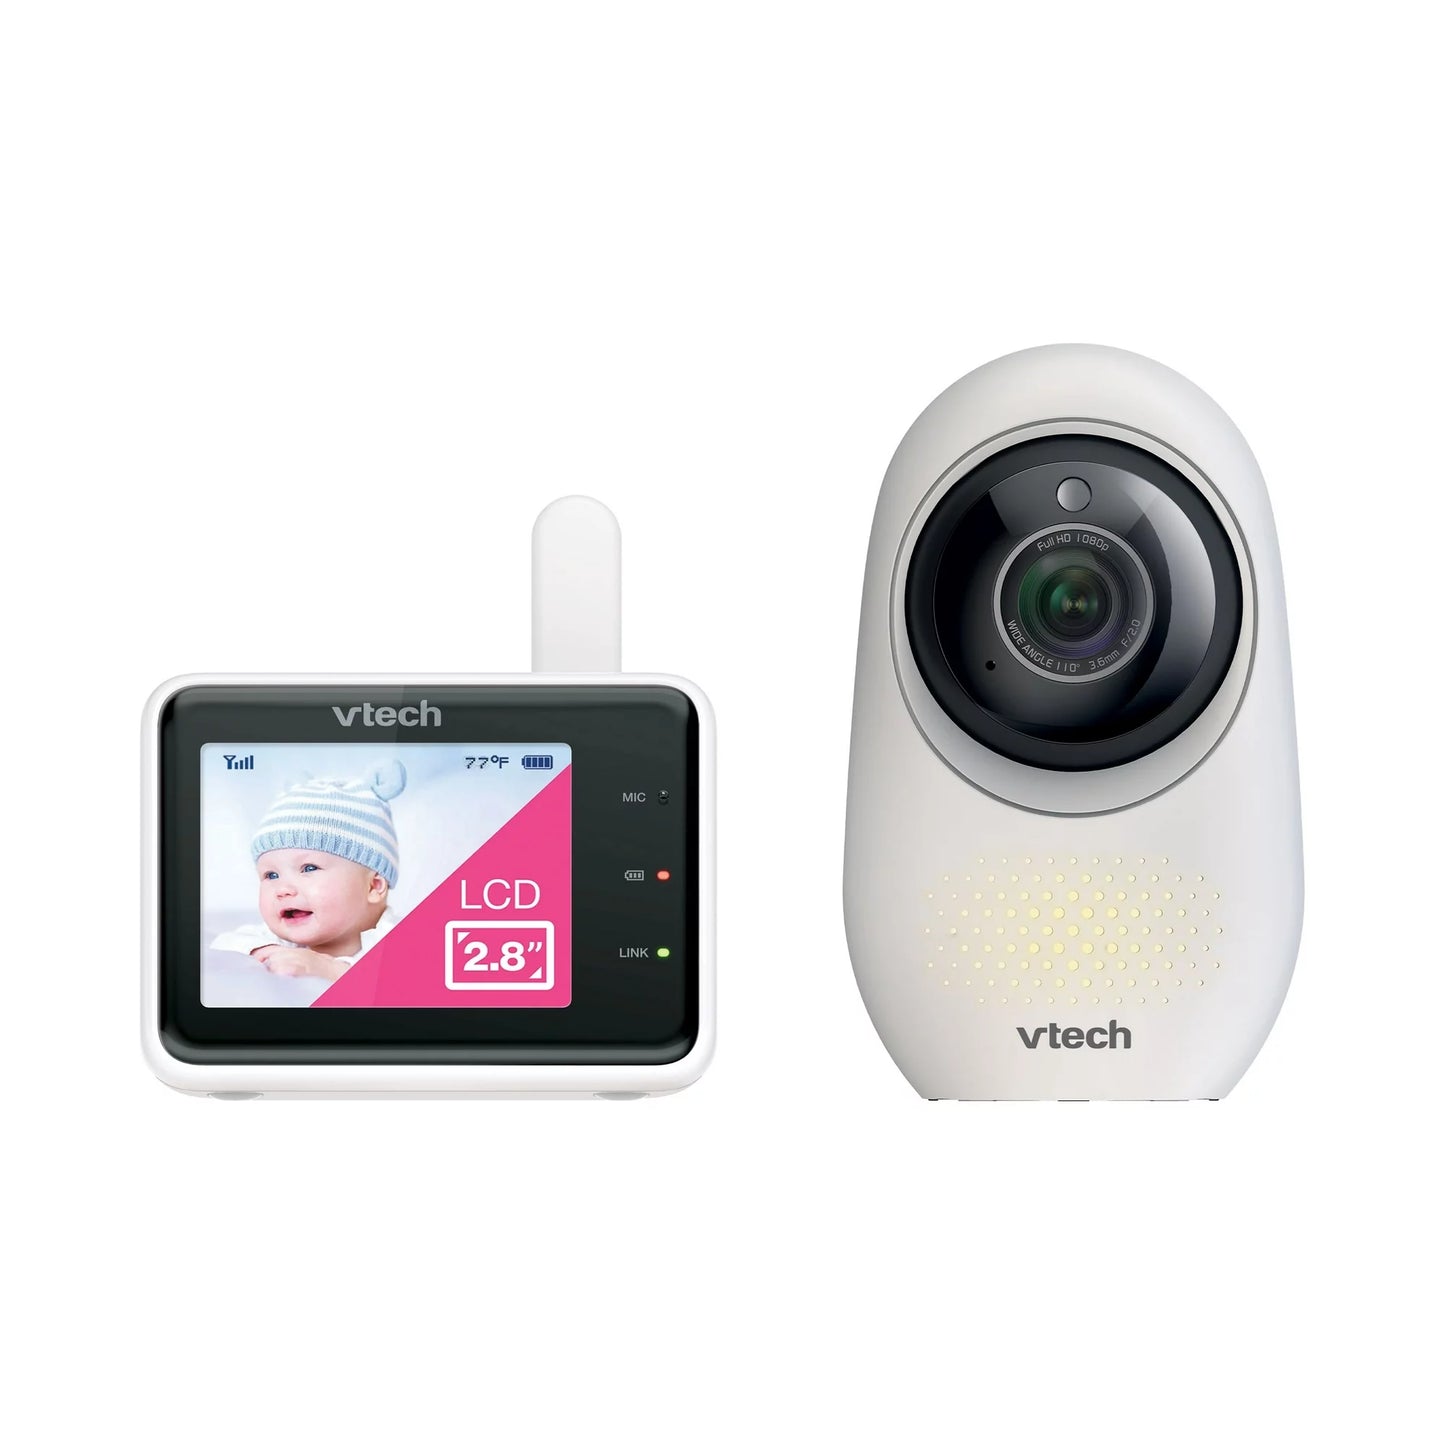 Vtech 2.8" Smart Wi-Fi 1080p HD Video Baby Monitor with Remote Access